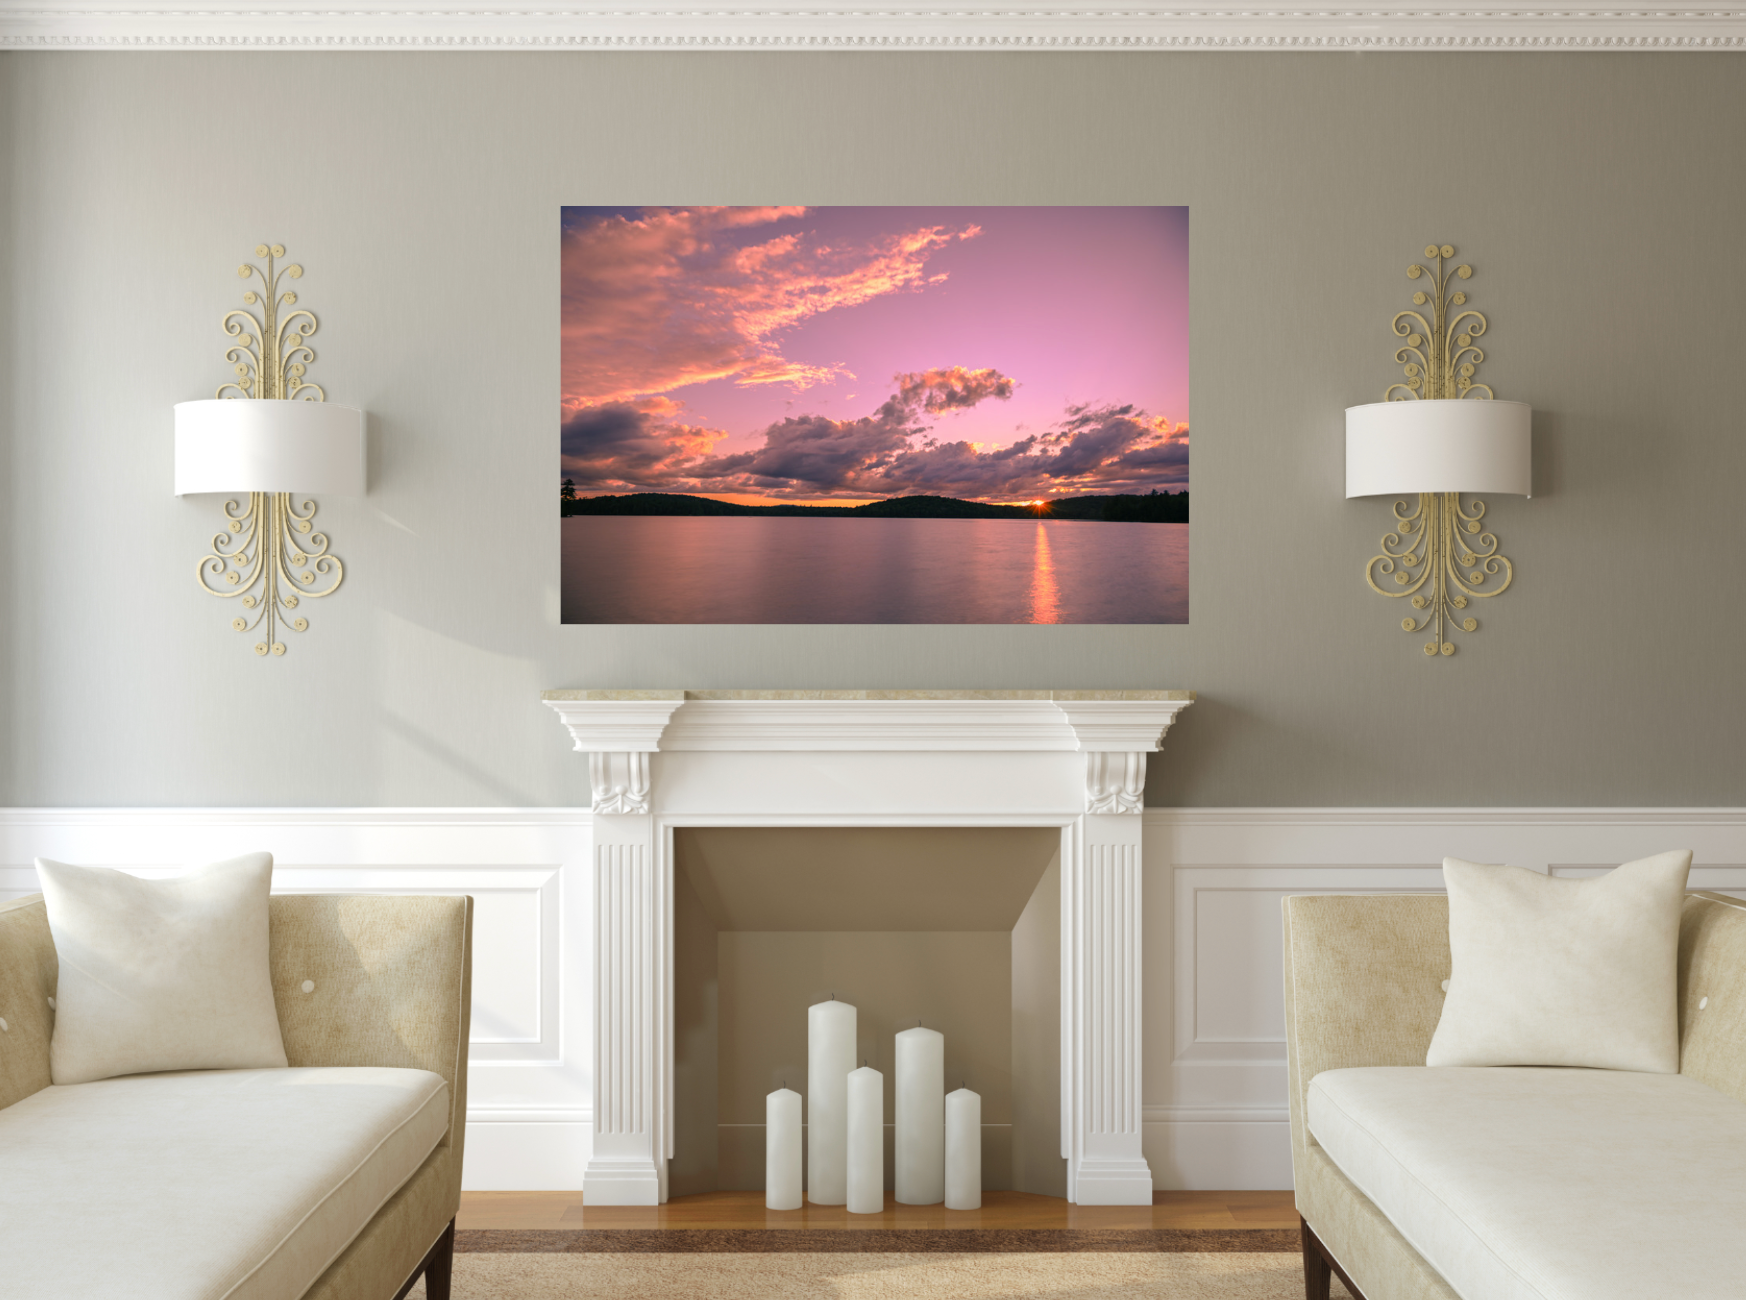 print of a Summer Sunset at Lake Colby